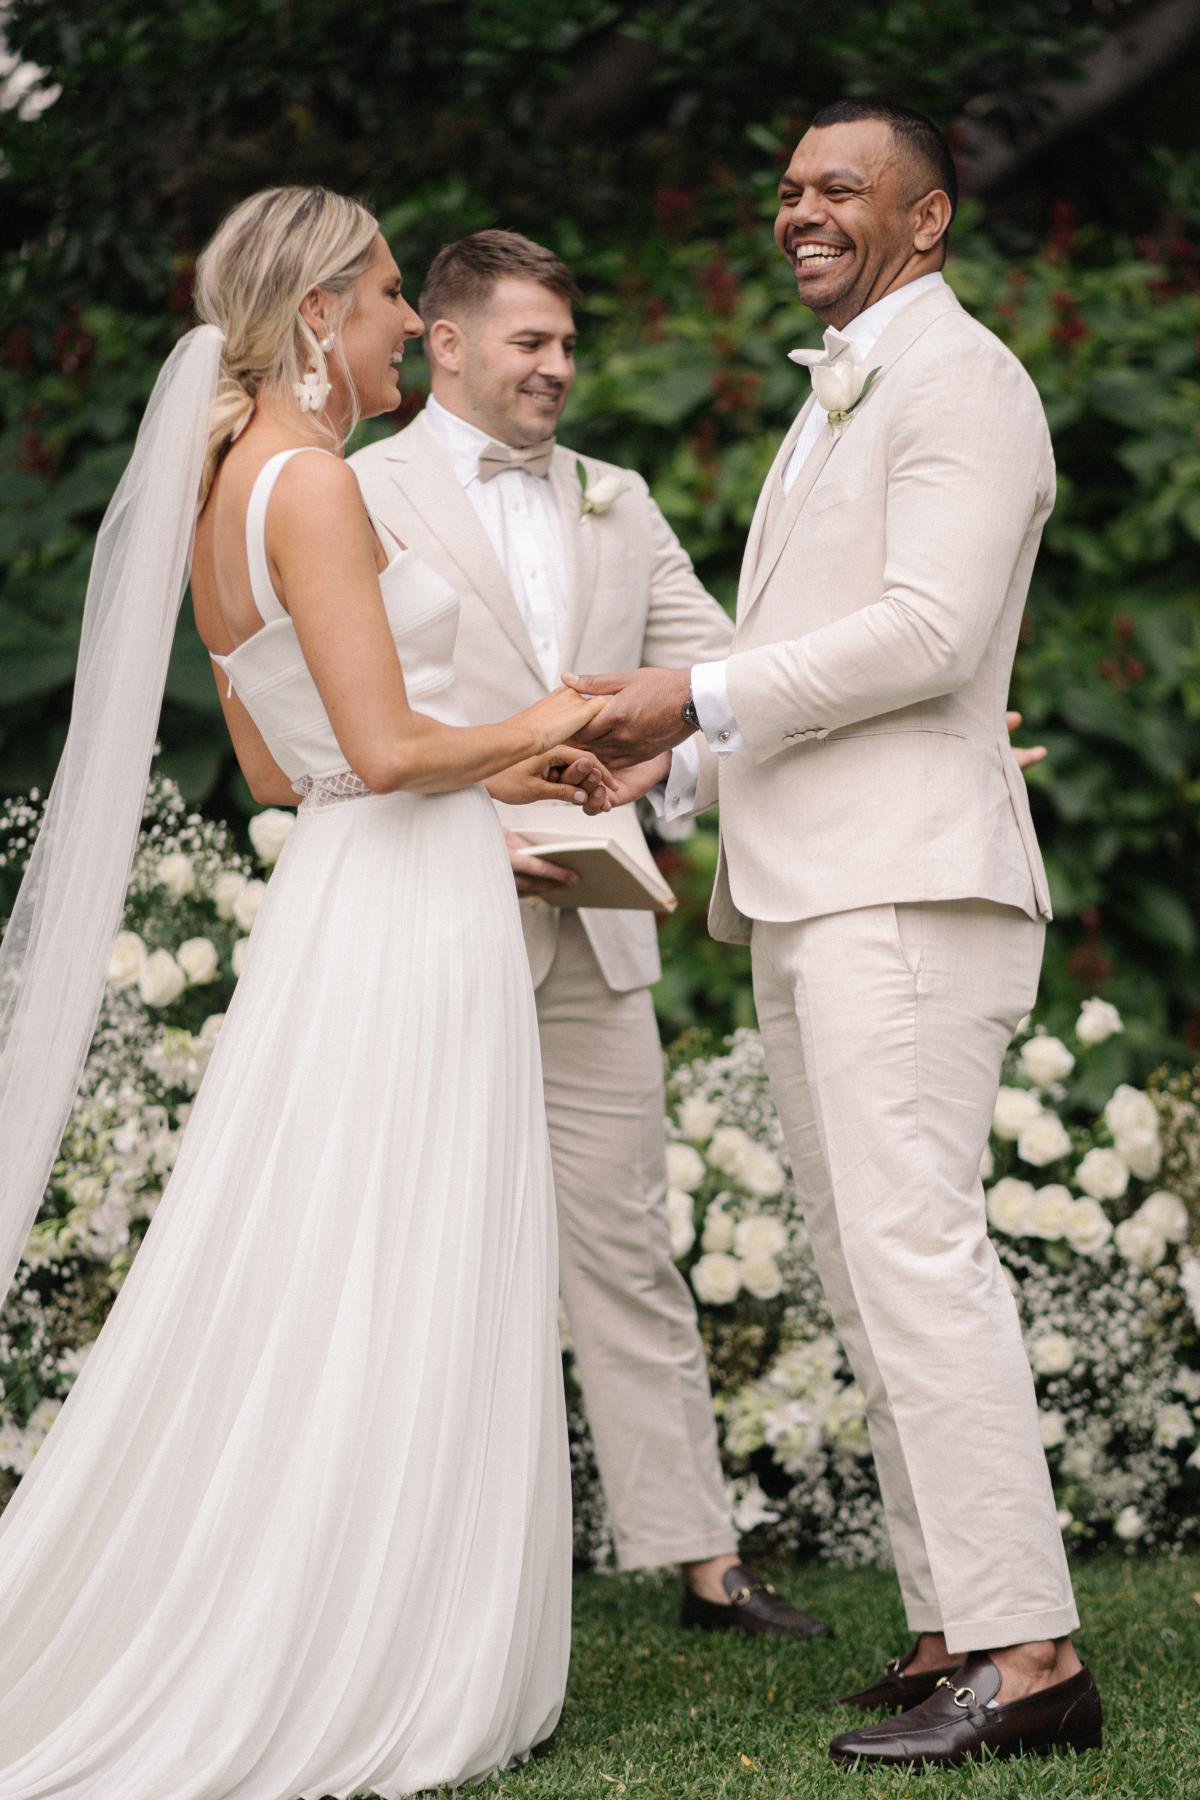 Real bride Maddi with husban Kurtley at alter, wedding featured on Vogue bridal, bride wearing the Daisy gown by Karen Willis Holmes.